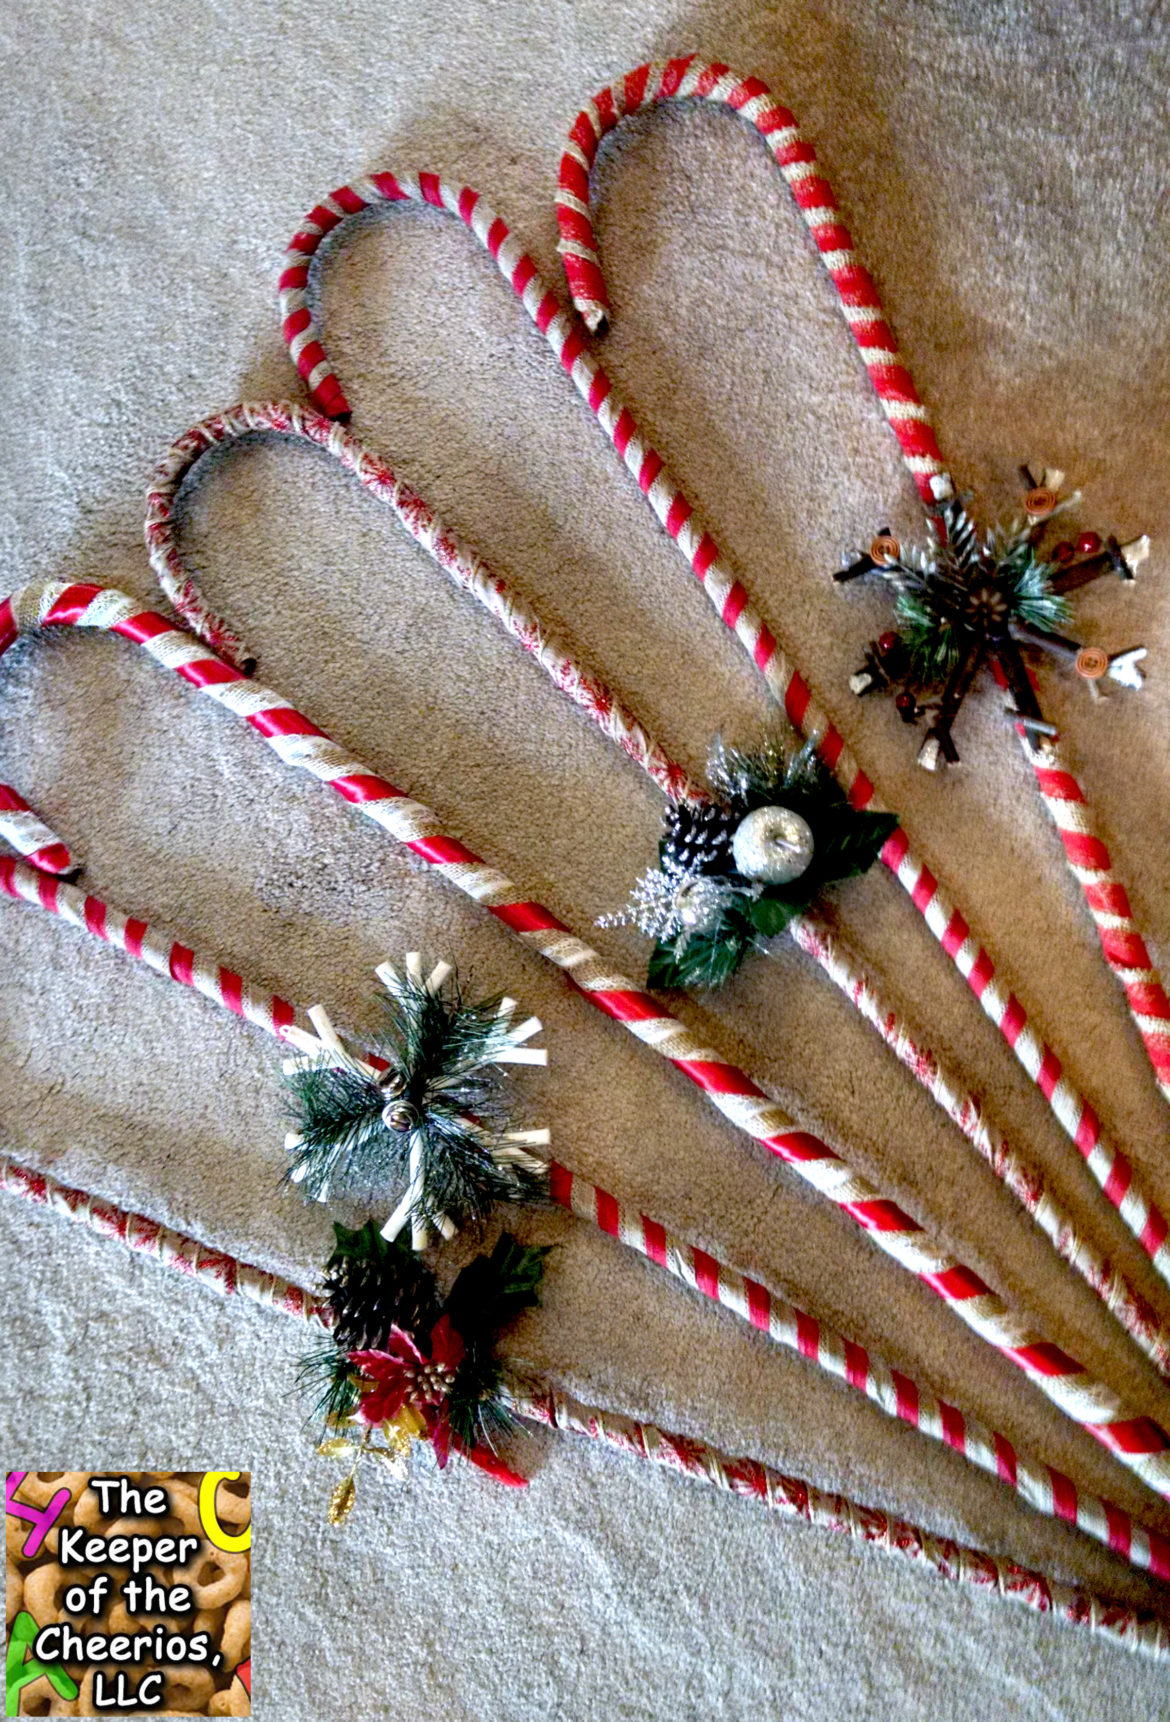 burlap-wrapped-candy-canes-7